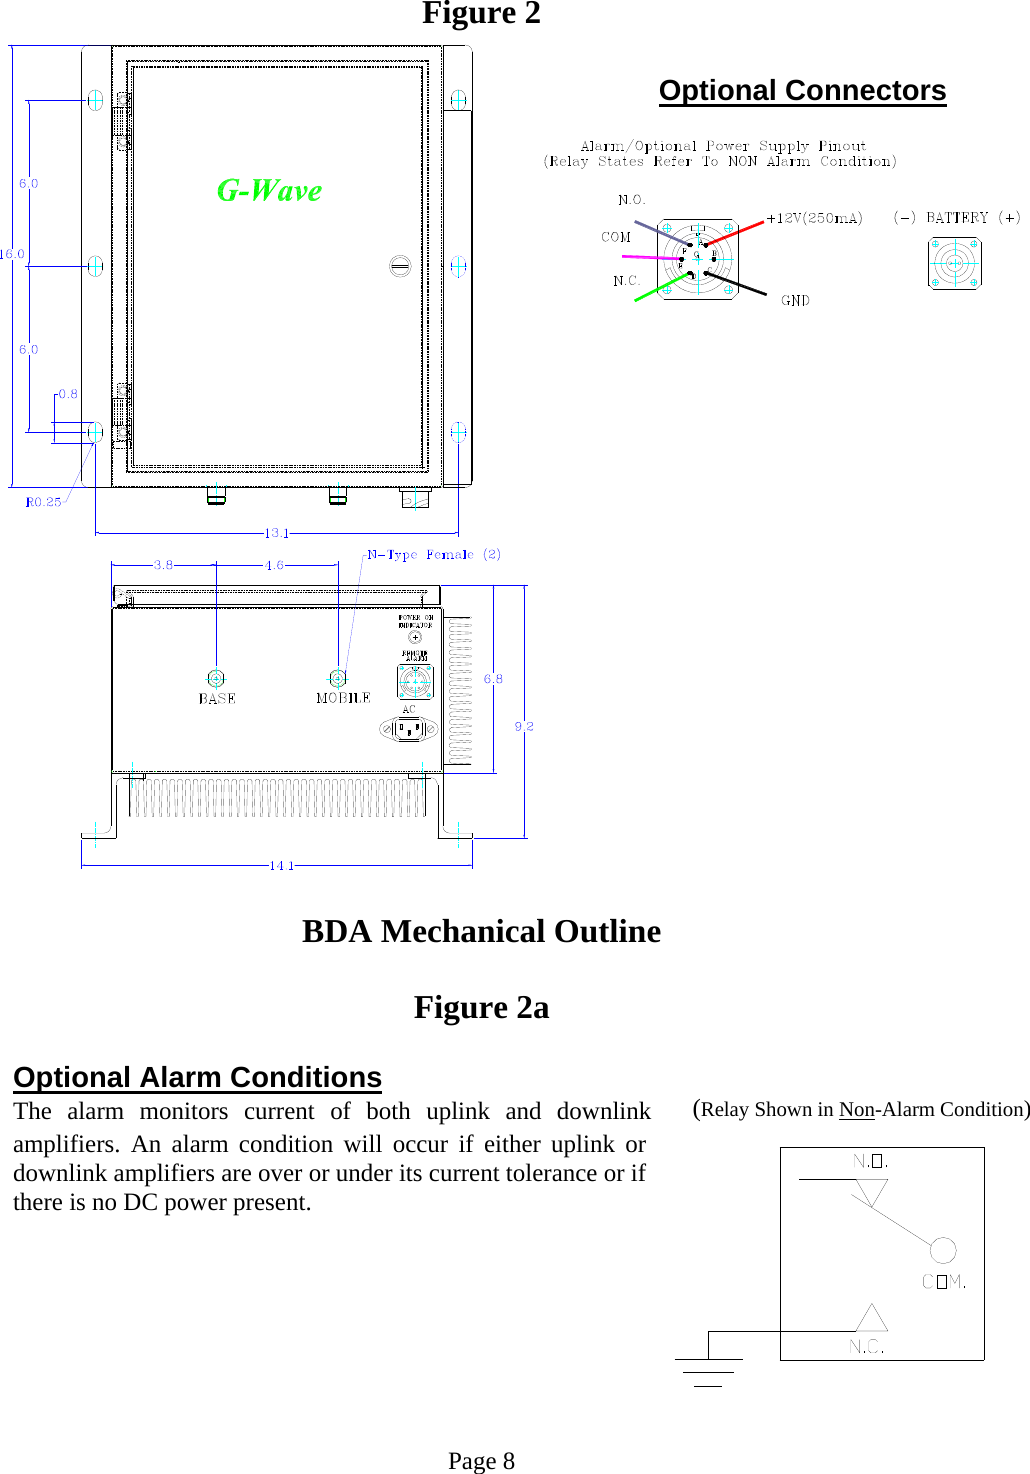 Figure 2    Optional Connectors                 BDA Mechanical Outline  Figure 2a       The alarm monitors current of both uplink and downlink amplifiers. An alarm condition will occur if either uplink or downlink amplifiers are over or under its current tolerance or if there is no DC power present.       Optional Alarm Conditions    (Relay Shown in Non-Alarm Condition)                                                                                                                             Page 8 